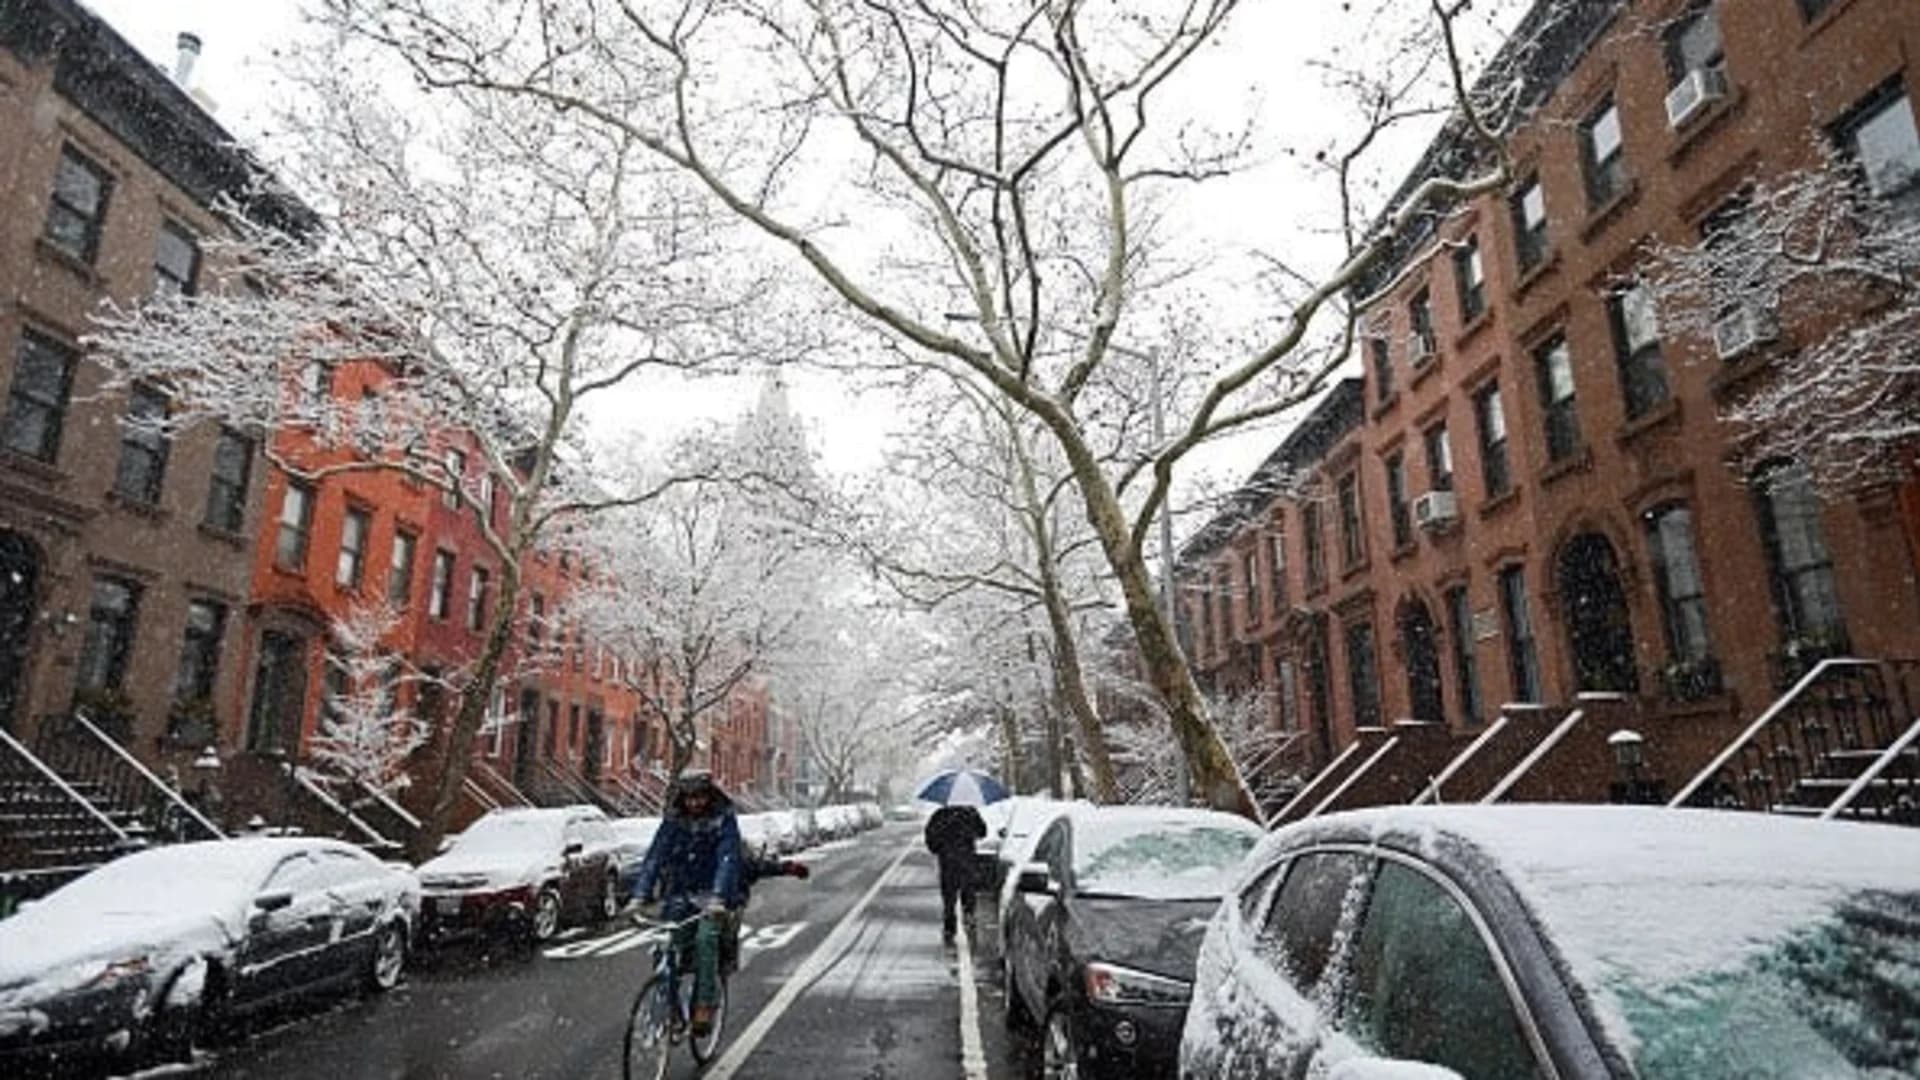 Snow expected across Brooklyn this weekend